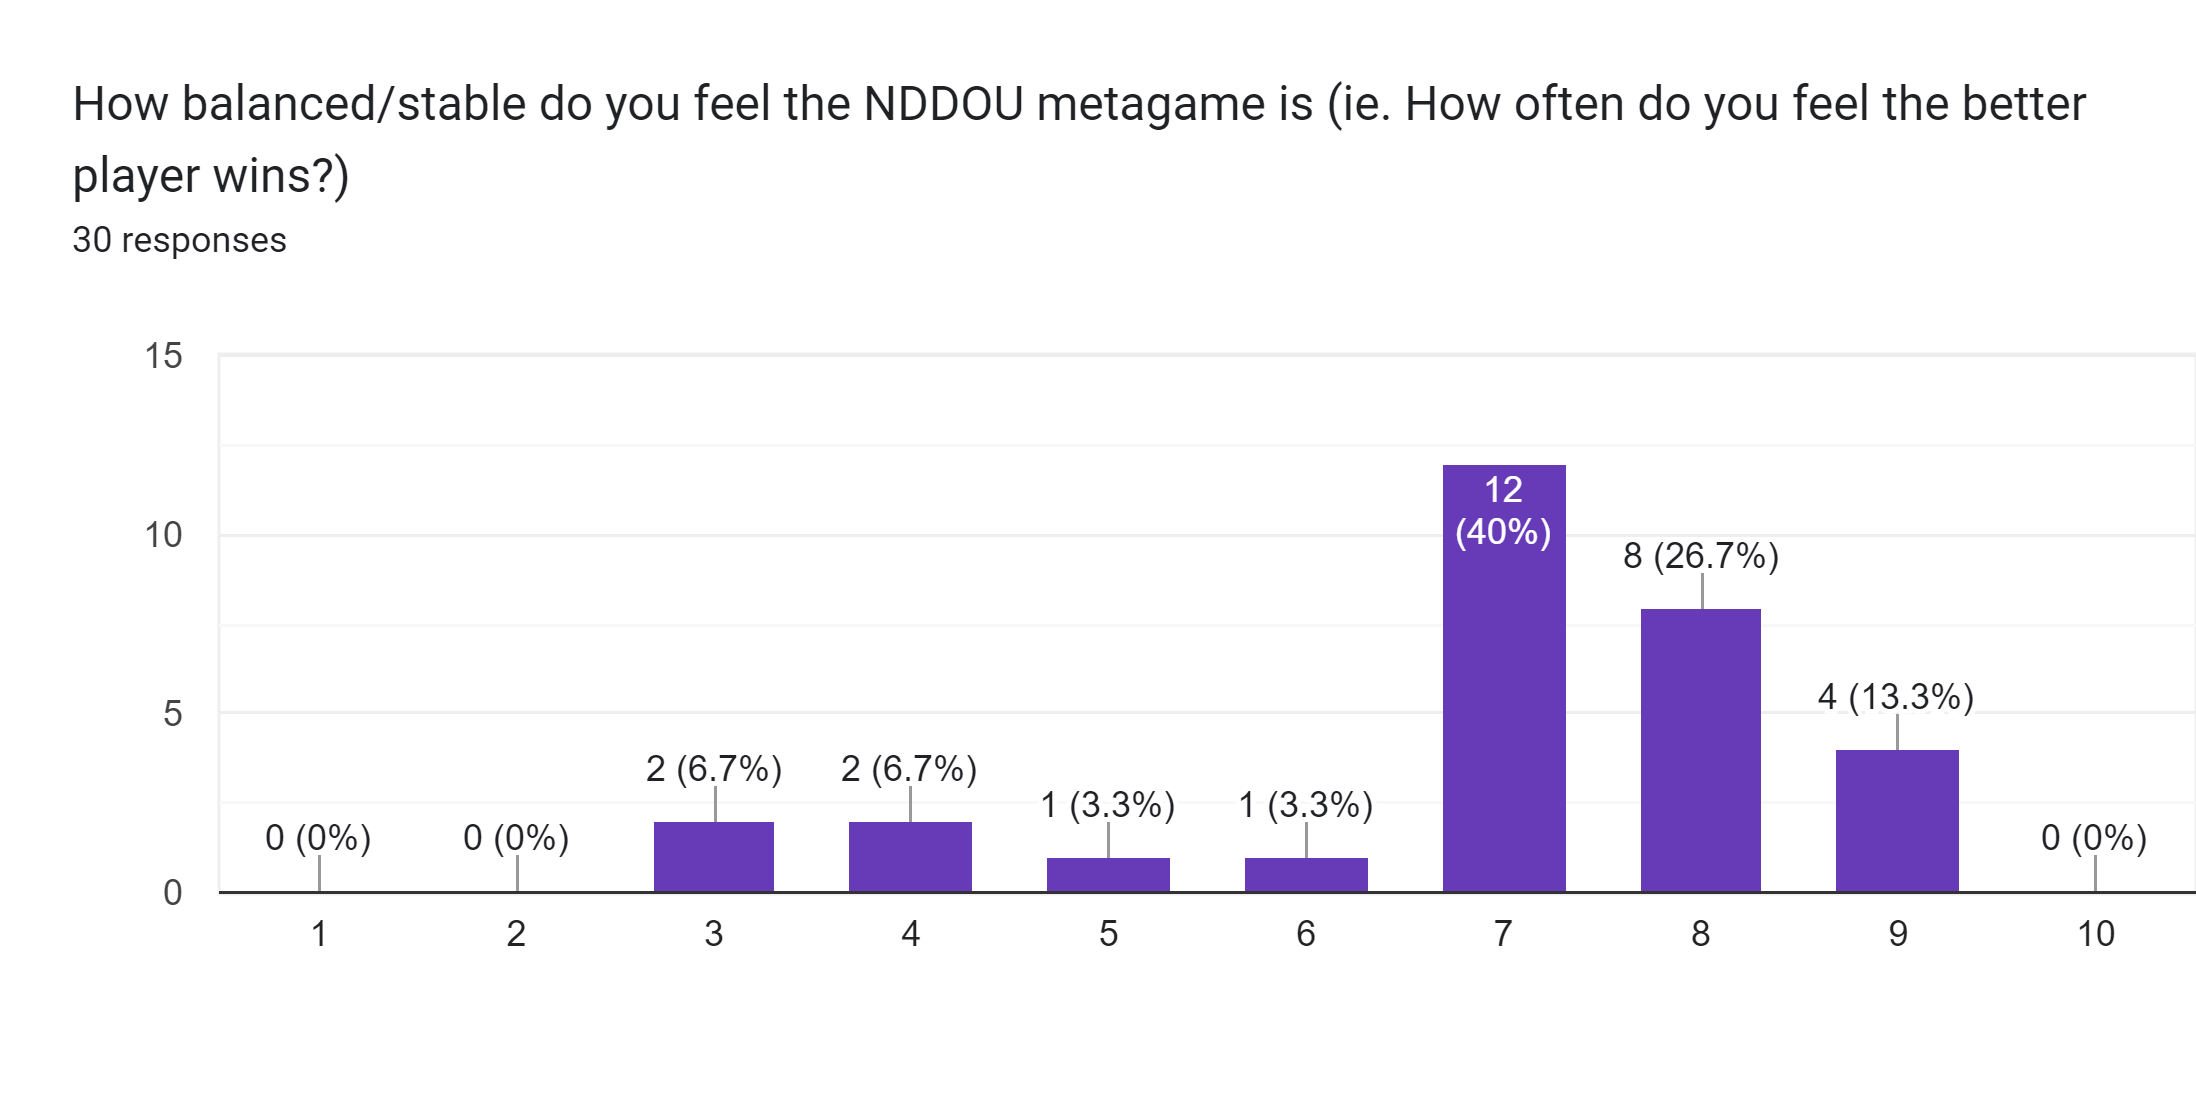 Forms response chart. Question title: How balanced/stable do you feel the NDDOU metagame is (ie. How often do you feel the better player wins?). Number of responses: 30 responses.